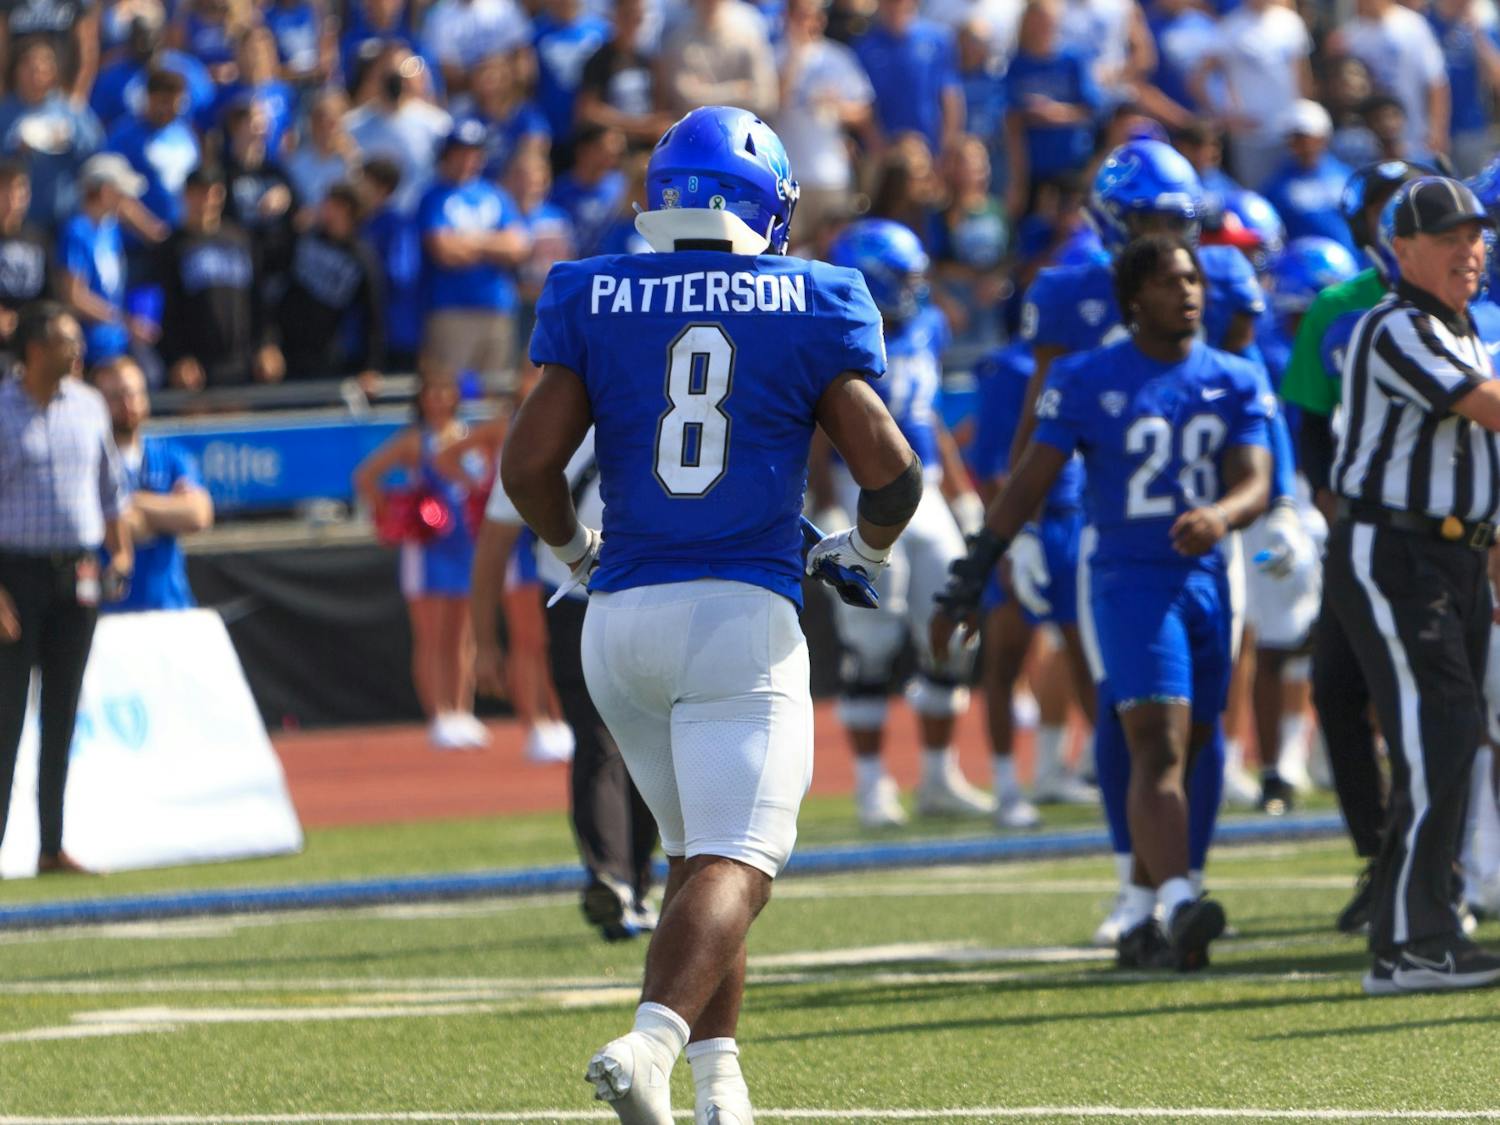 James Patterson, who’s been a starter at UB since 2018, thrives as a run defender between the tackles.